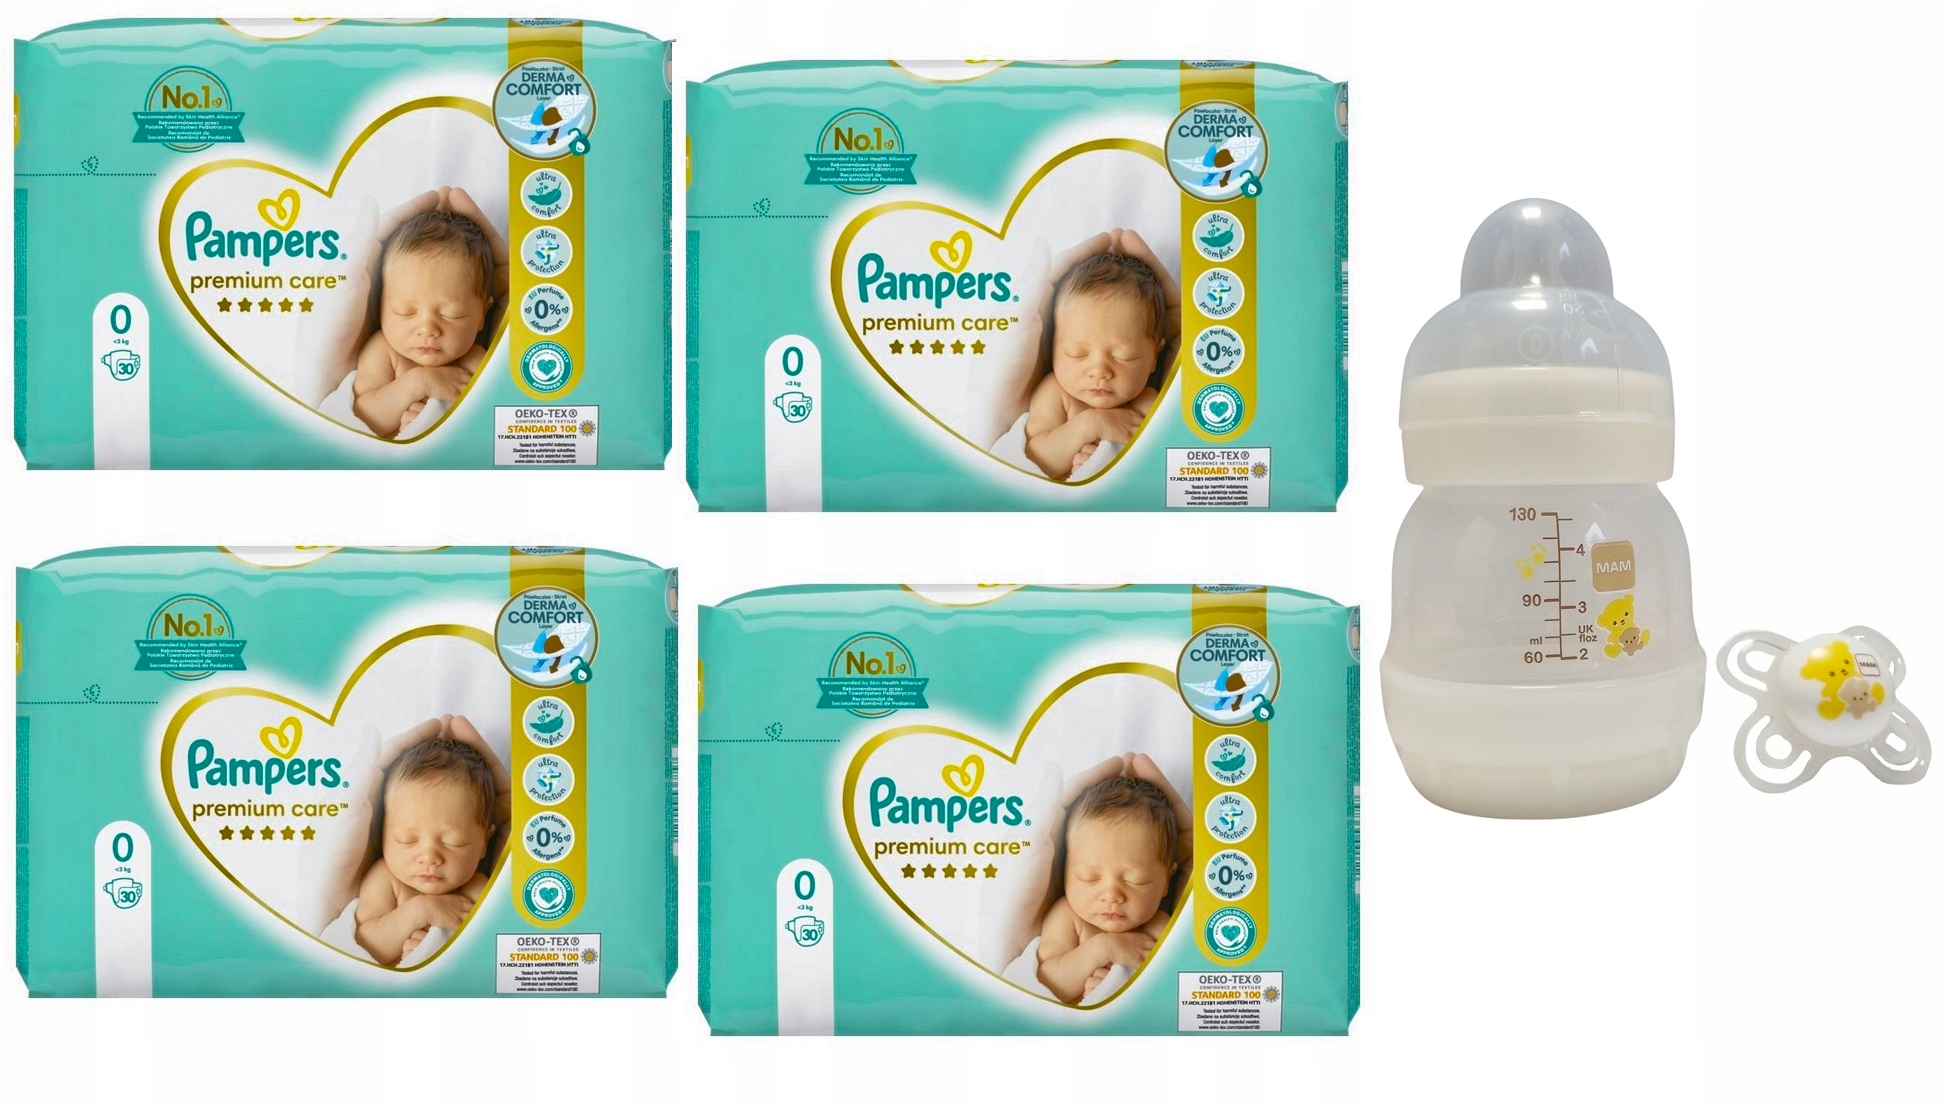 pampers premium care czy new baby